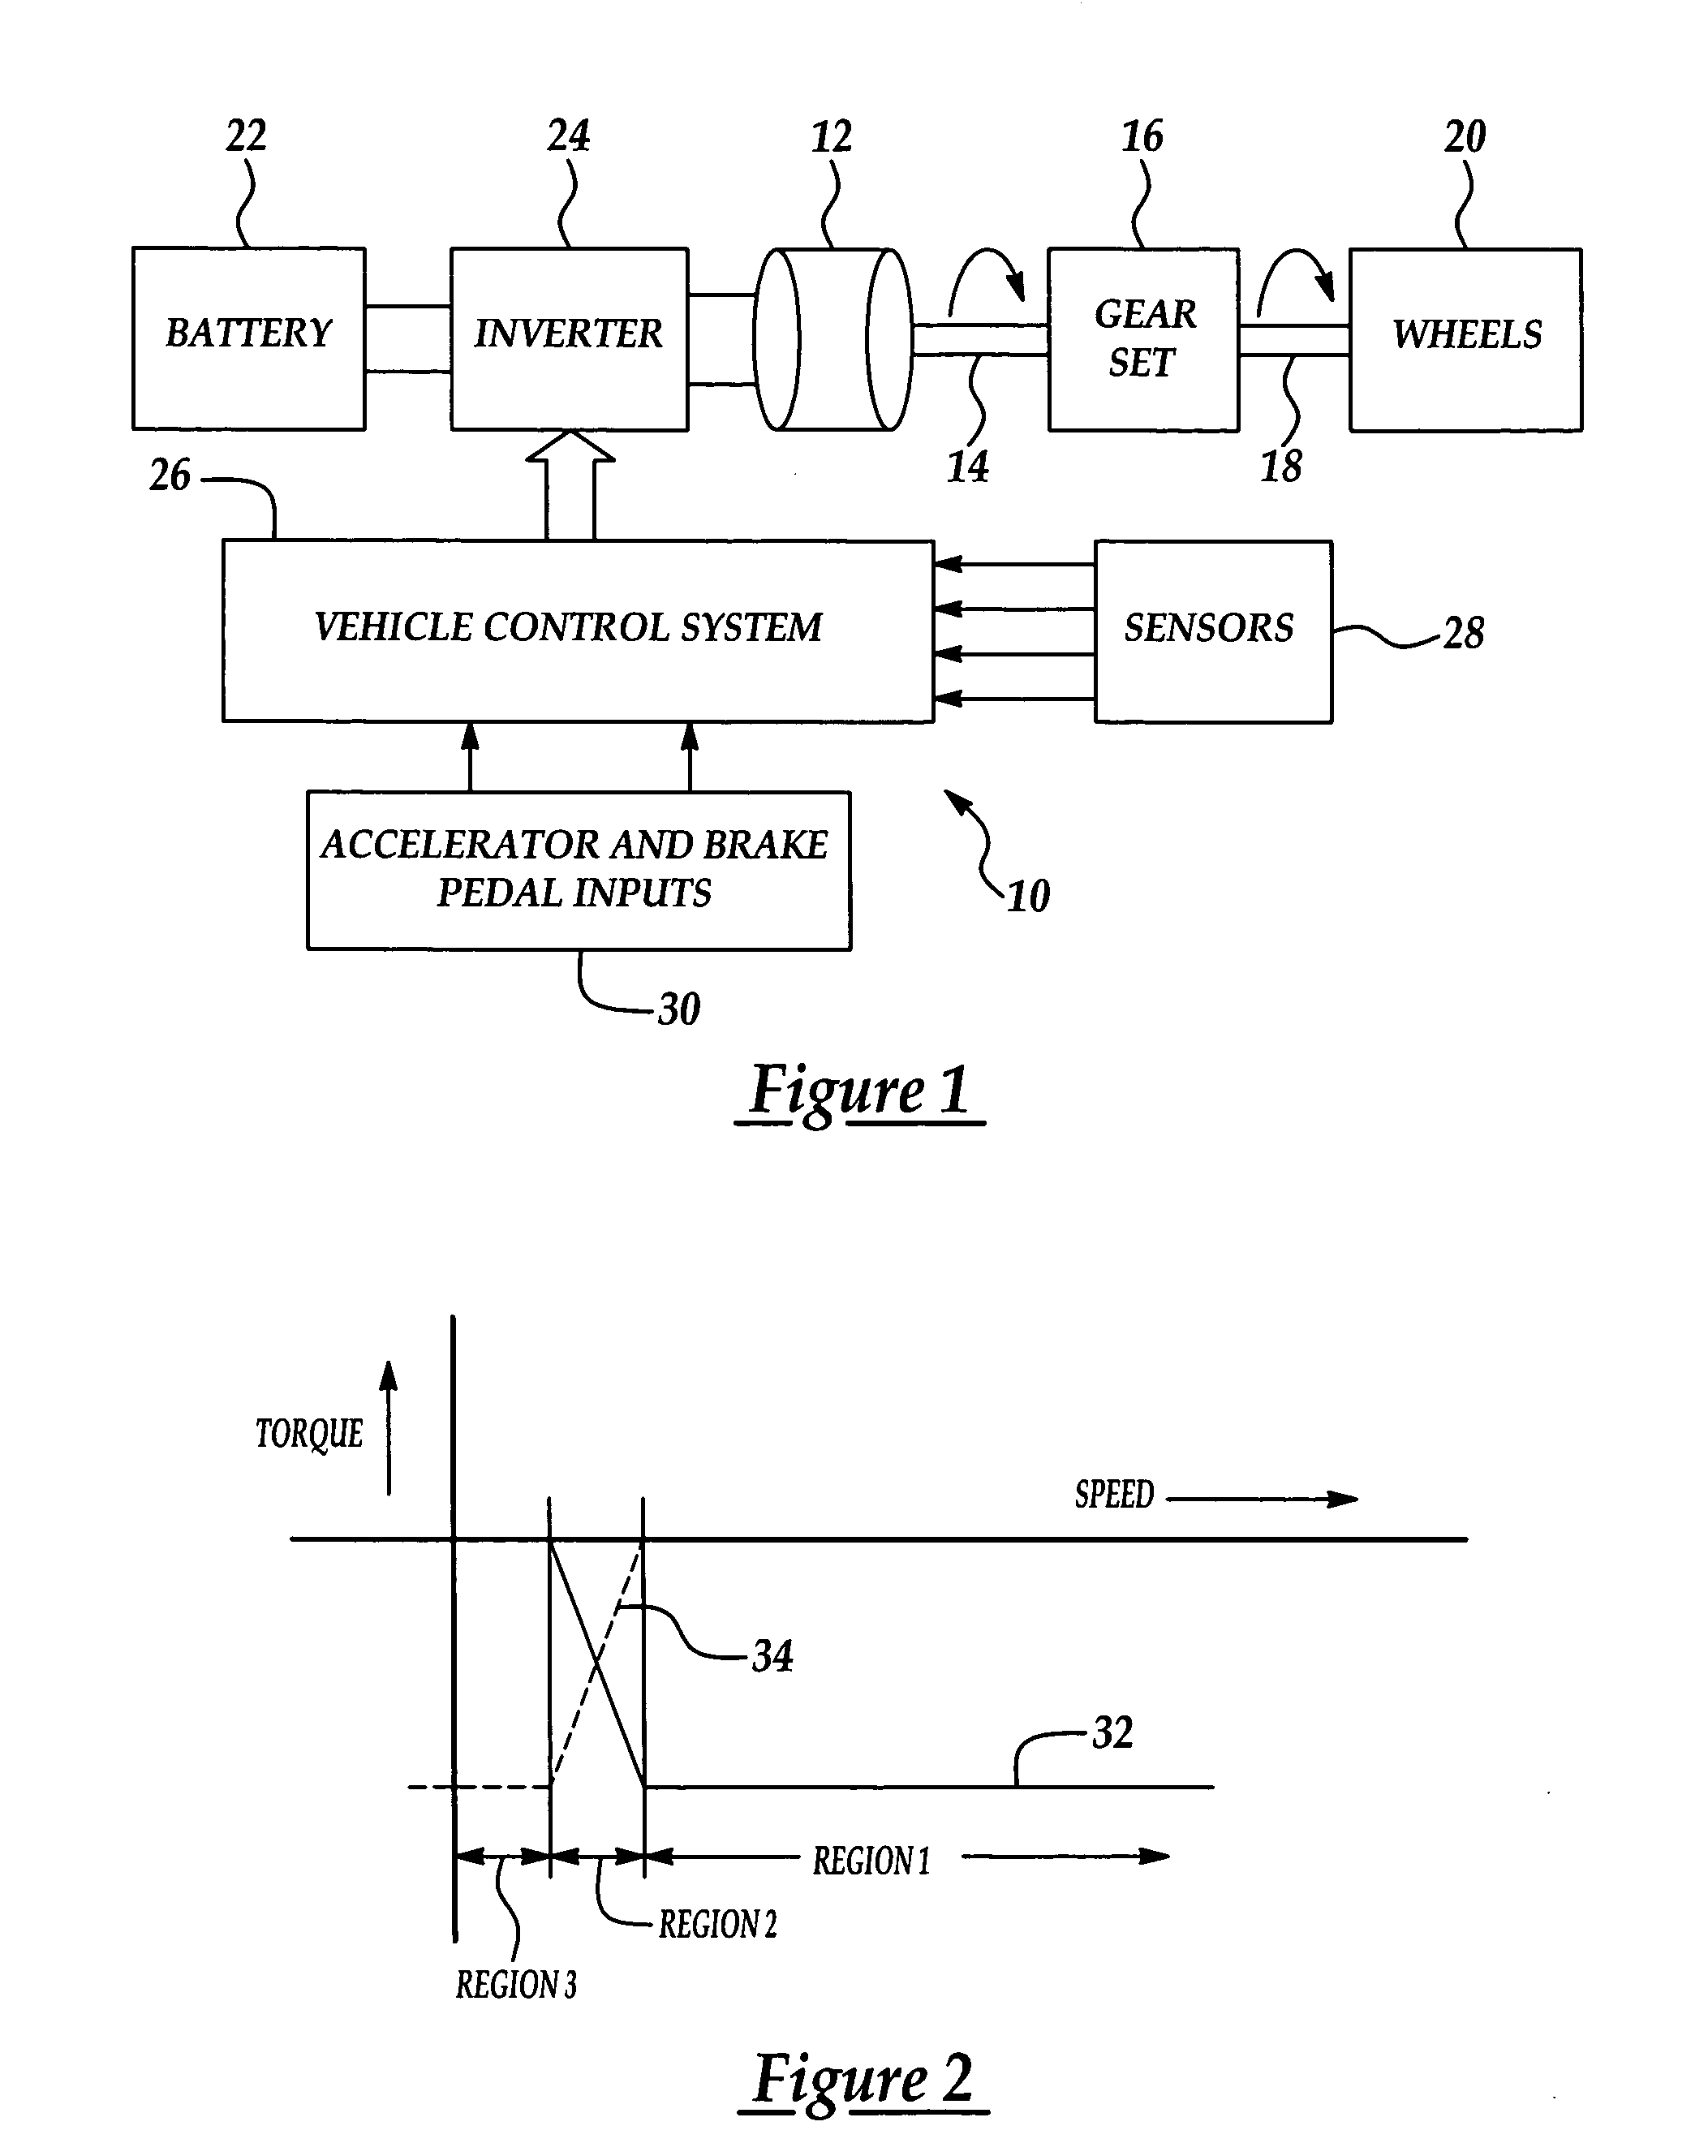 Method and apparatus for braking and stopping vehicles having an electric drive